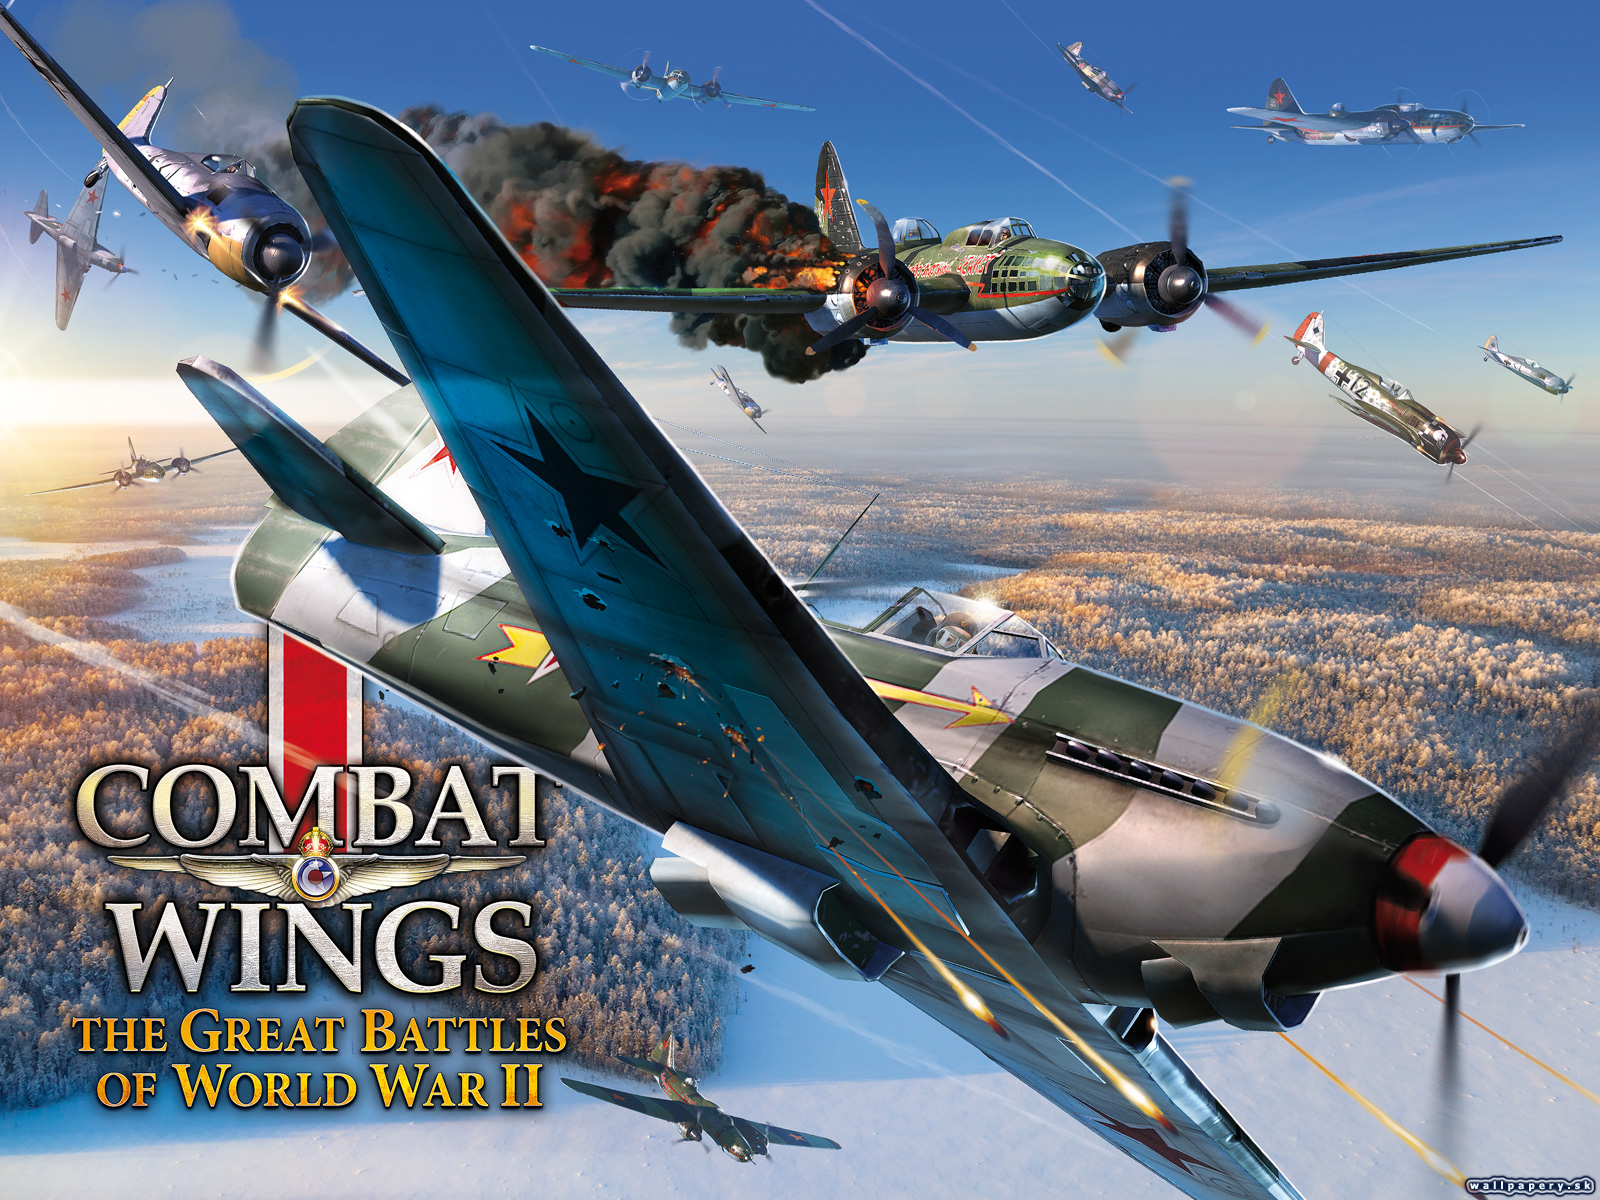 Combat Wings: The Great Battles of WWII - wallpaper 3